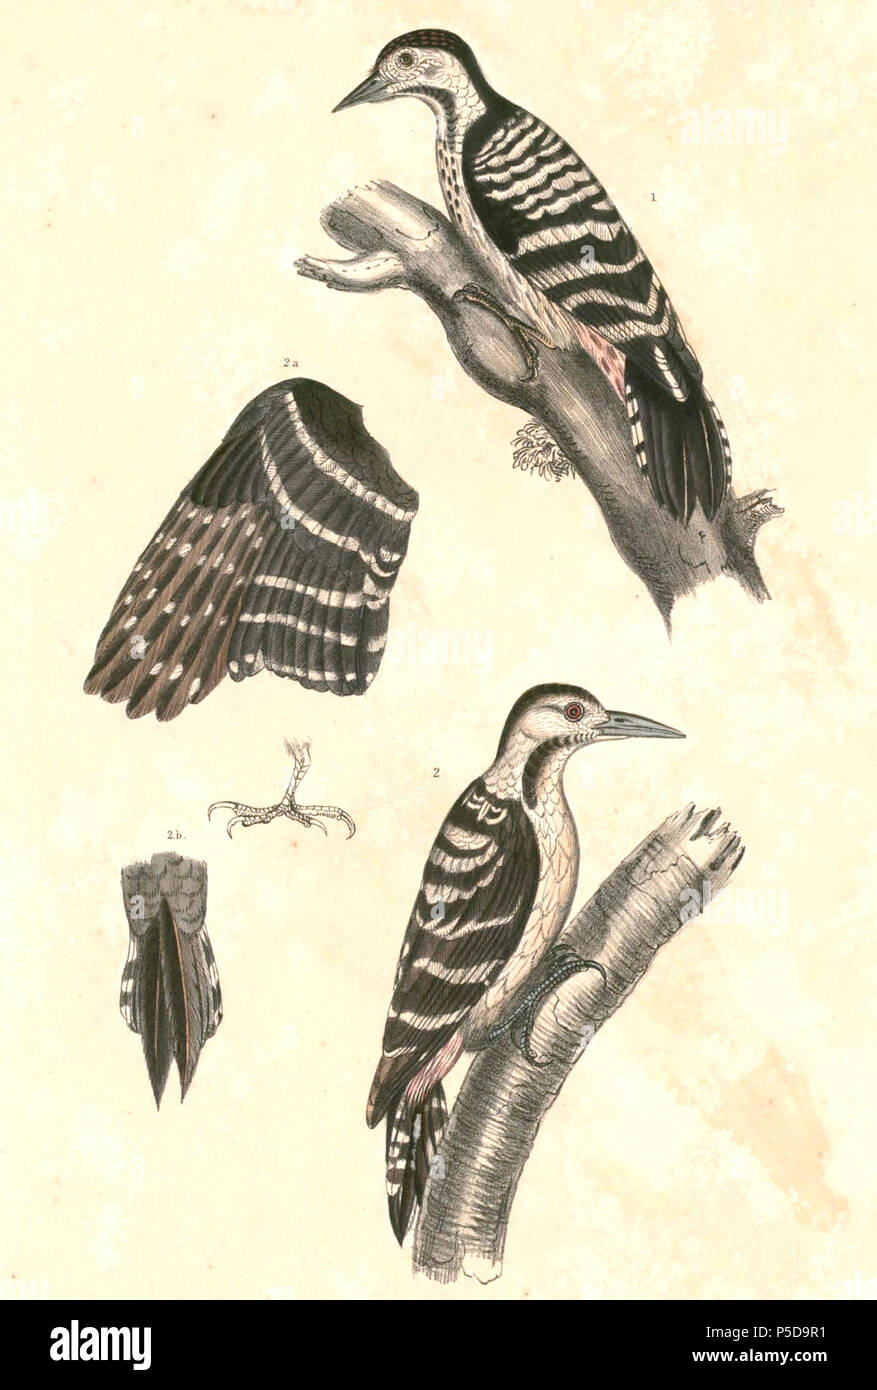 N/A.  English: « Picus macei » = Dendrocopos macei (Fulvous-breasted Woodpecker) - male, female, wing and tail Français: « Picus macei » = Dendrocopos macei (Pic de Macé) - mâle, femelle, aile et queue . between 1830 and 1832.   Thomas Hardwicke  (1755–1835)     Alternative names Hardw.  Description English soldier and naturalist  Date of birth/death 1755 3 May 1835  Location of birth/death London Borough of Lambeth  Authority control  : Q2543258 VIAF:308180676 LCCN:nb2013018703 Botanist:Hardw. SUDOC:183009134 WorldCat 435 Dendrocopos macei Hardwicke Stock Photo